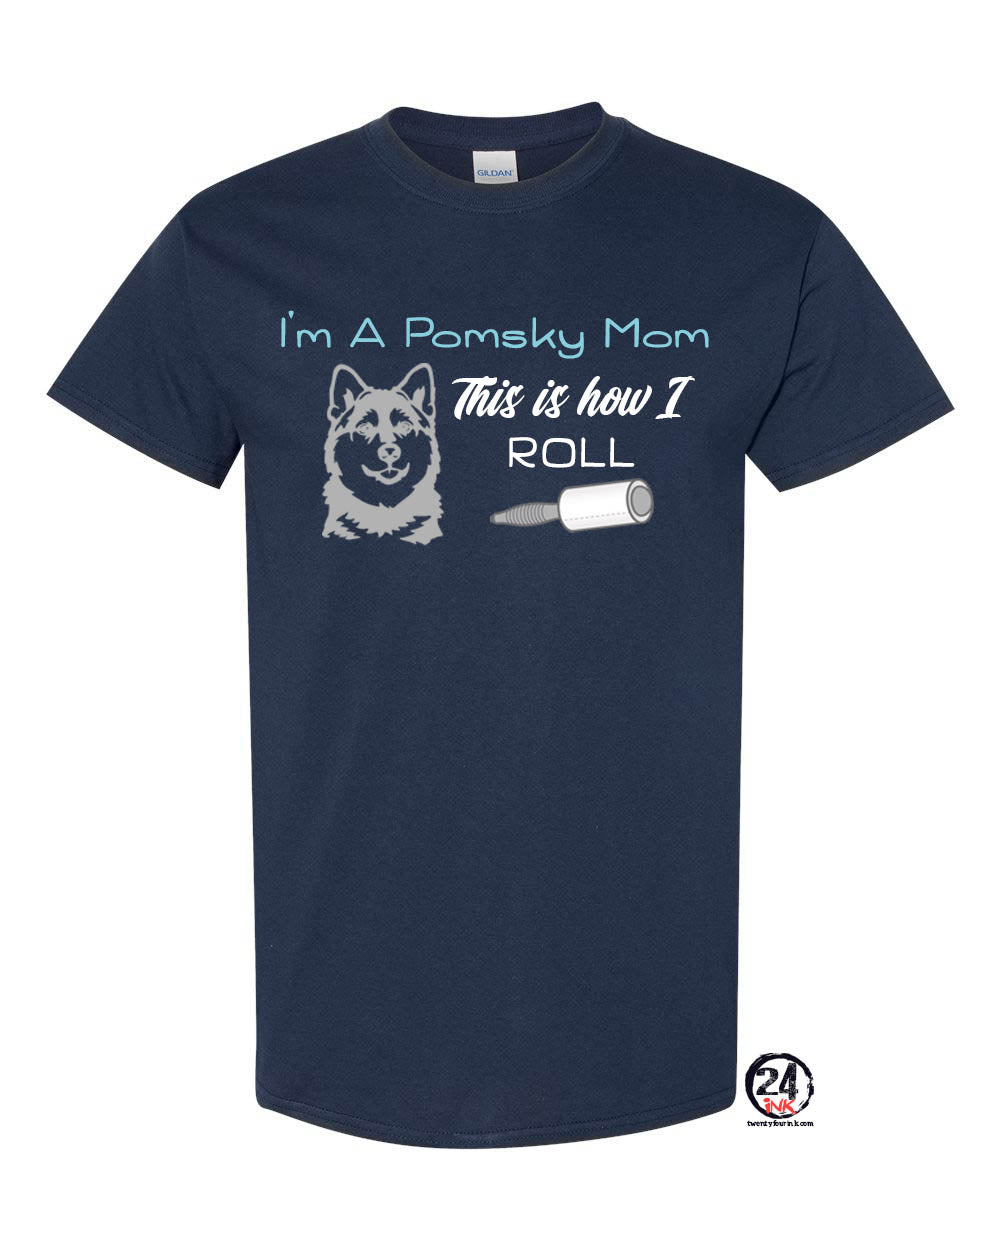 This is how I roll T Shirt